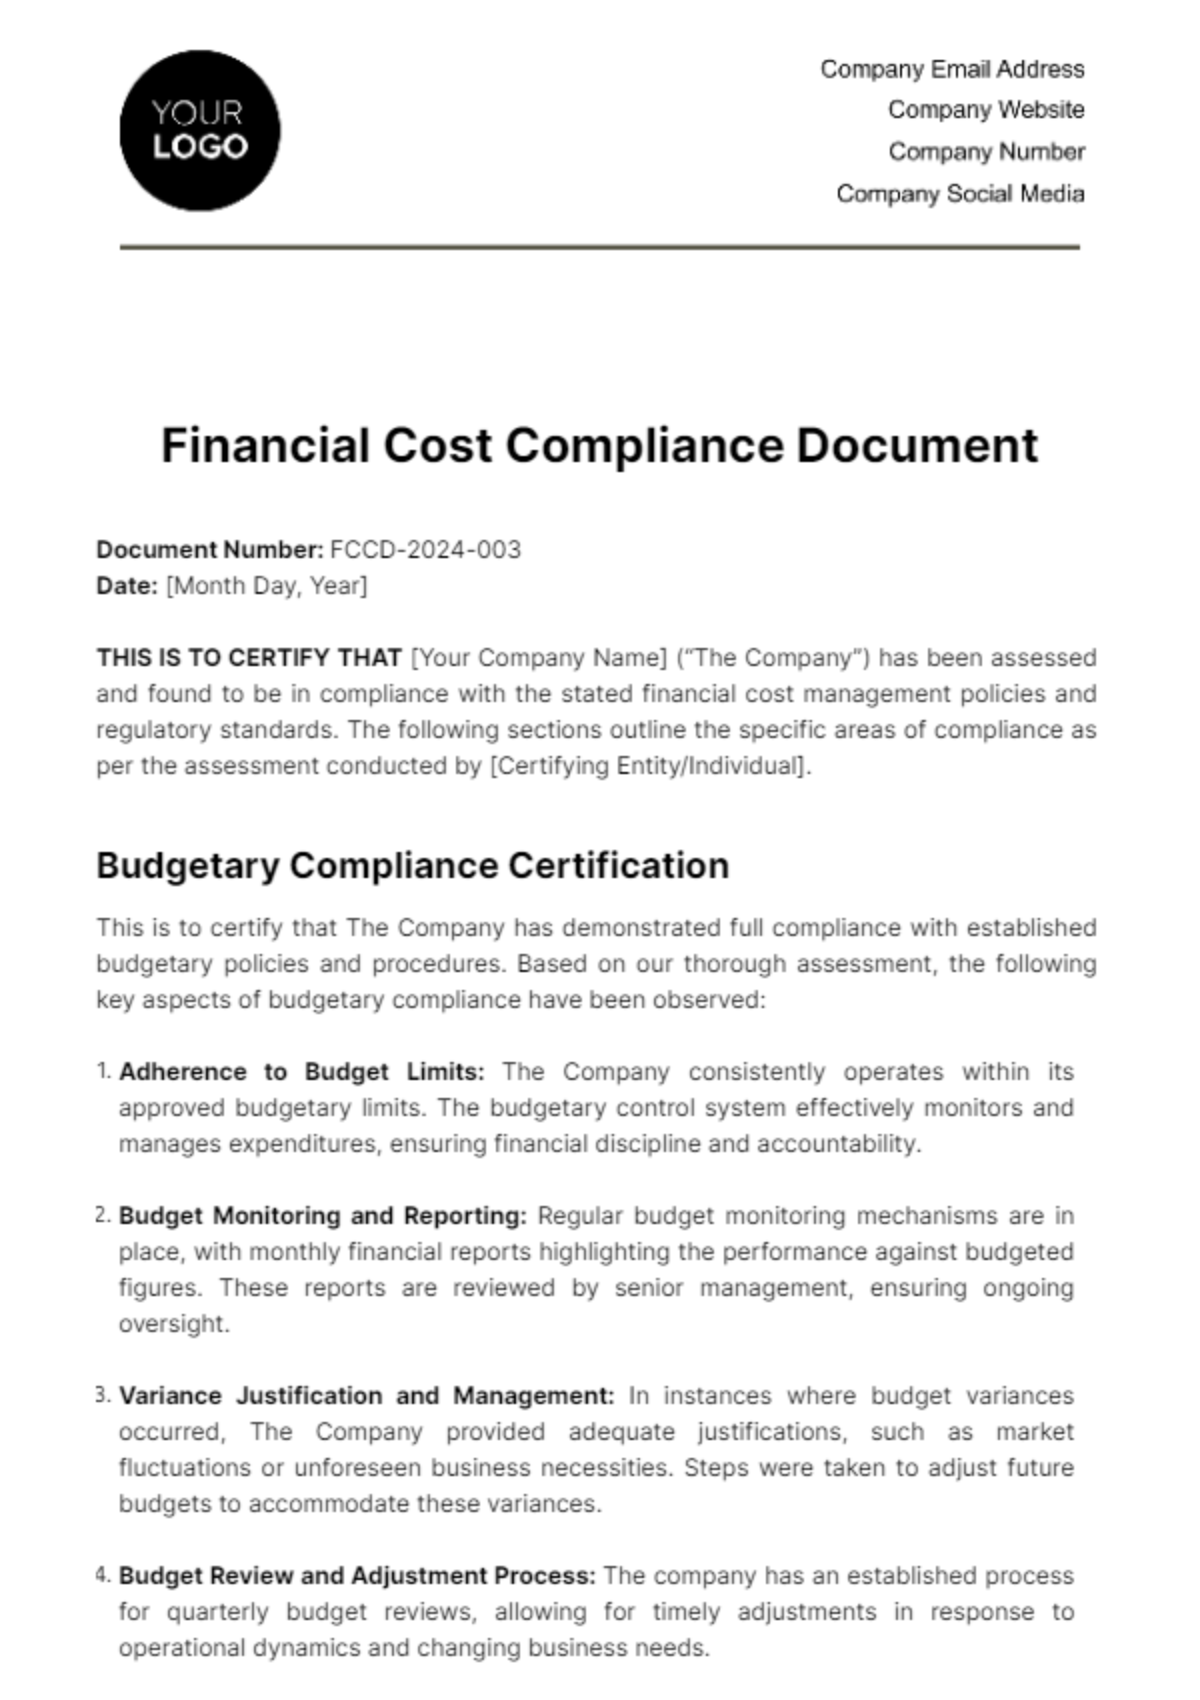 Free Financial Cost Compliance Document Template